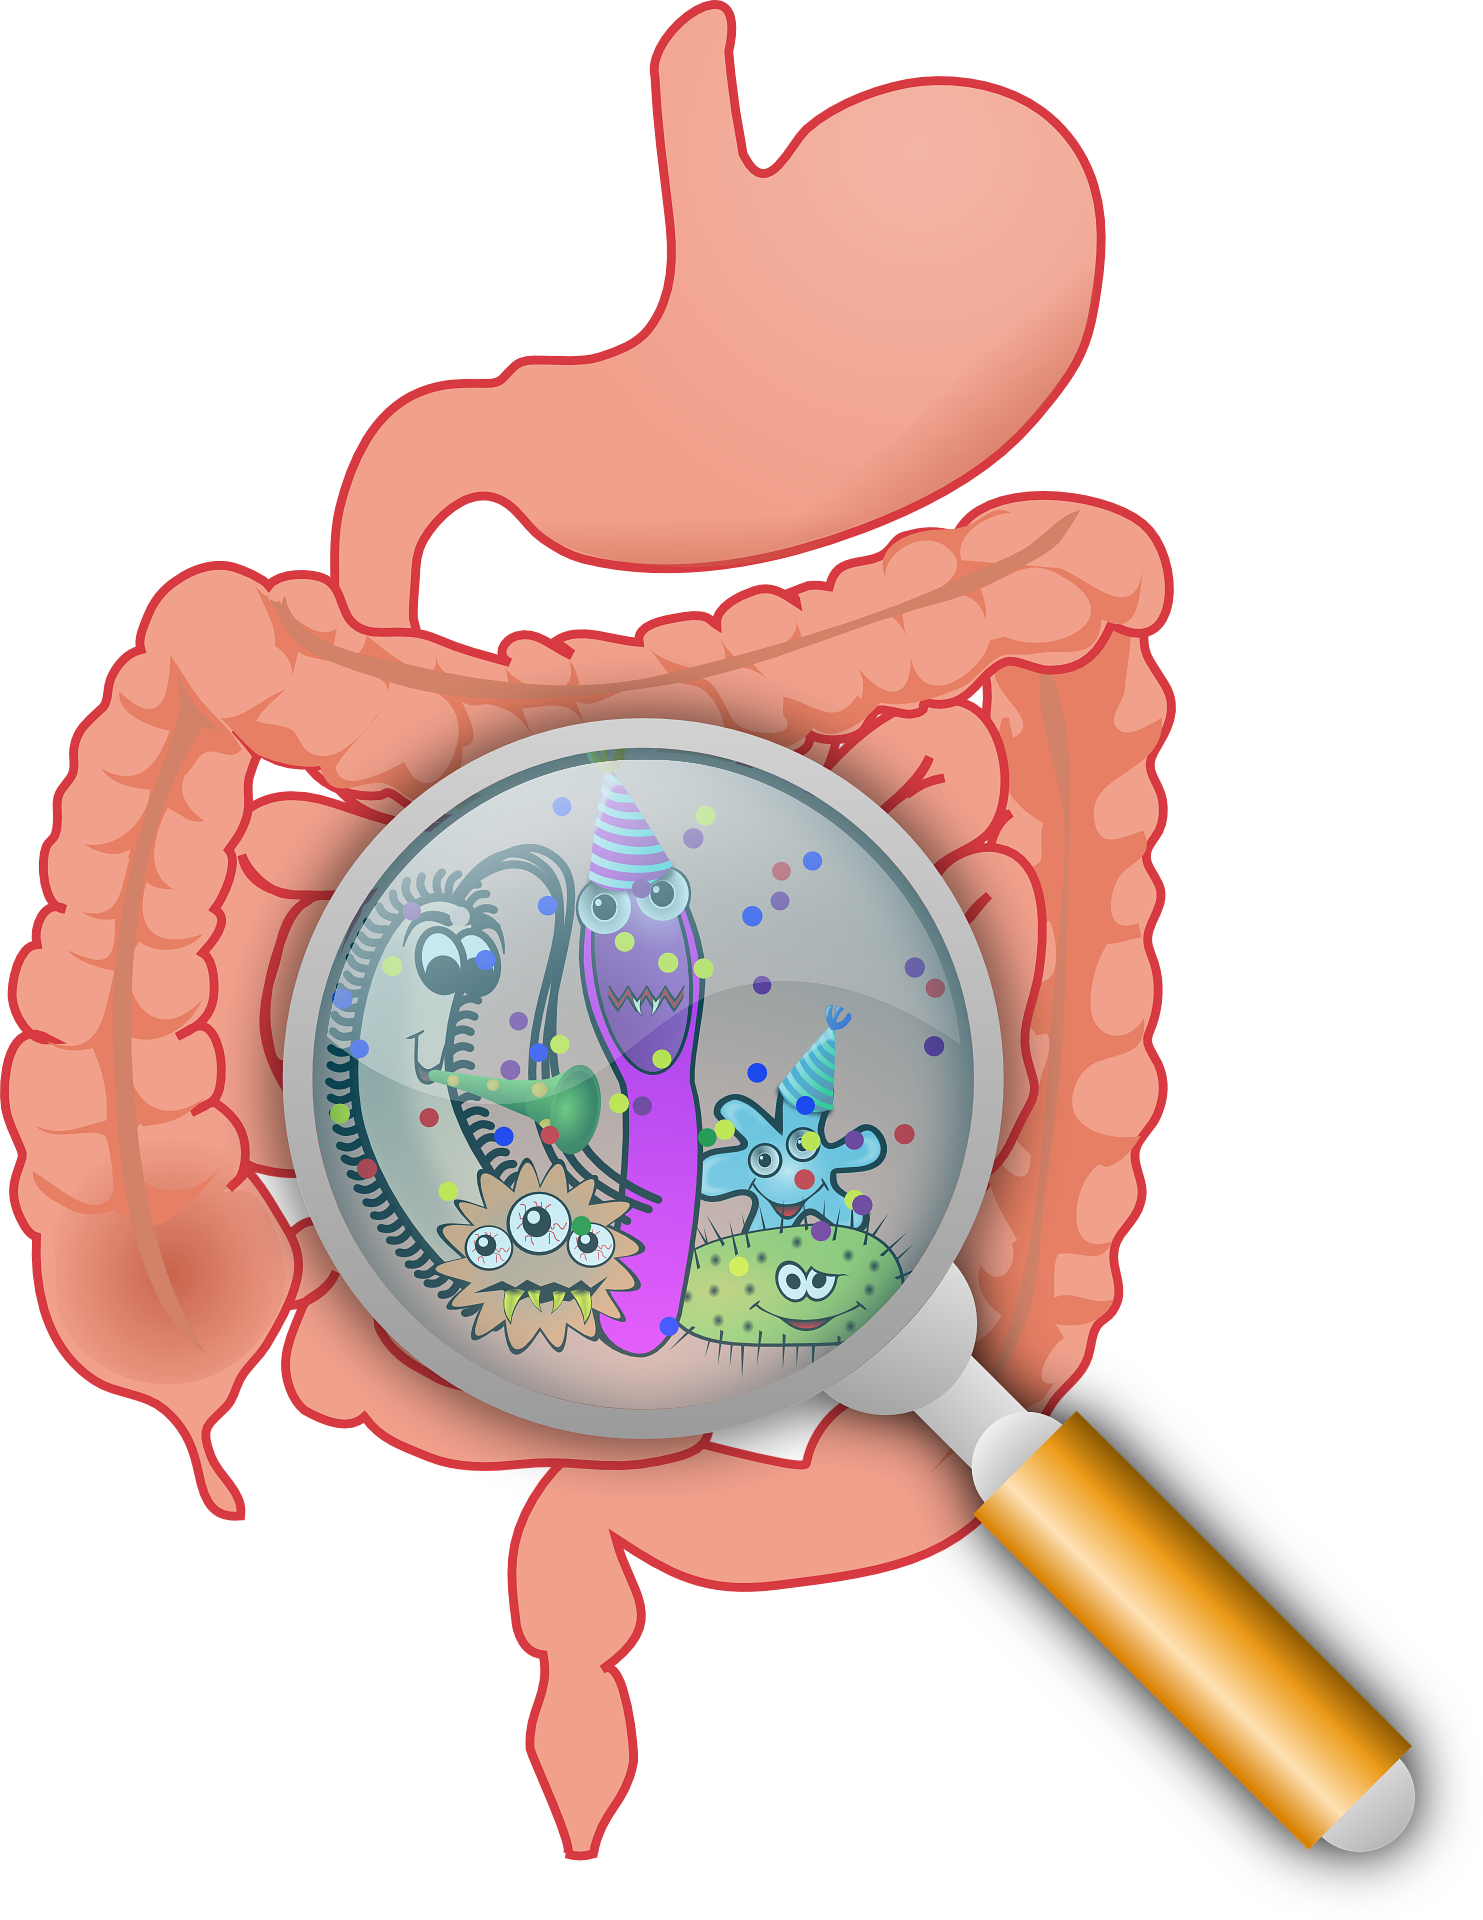 Systematic Review on Effects of Diet on Gut Microbiota in Relation to Metabolic Syndromes